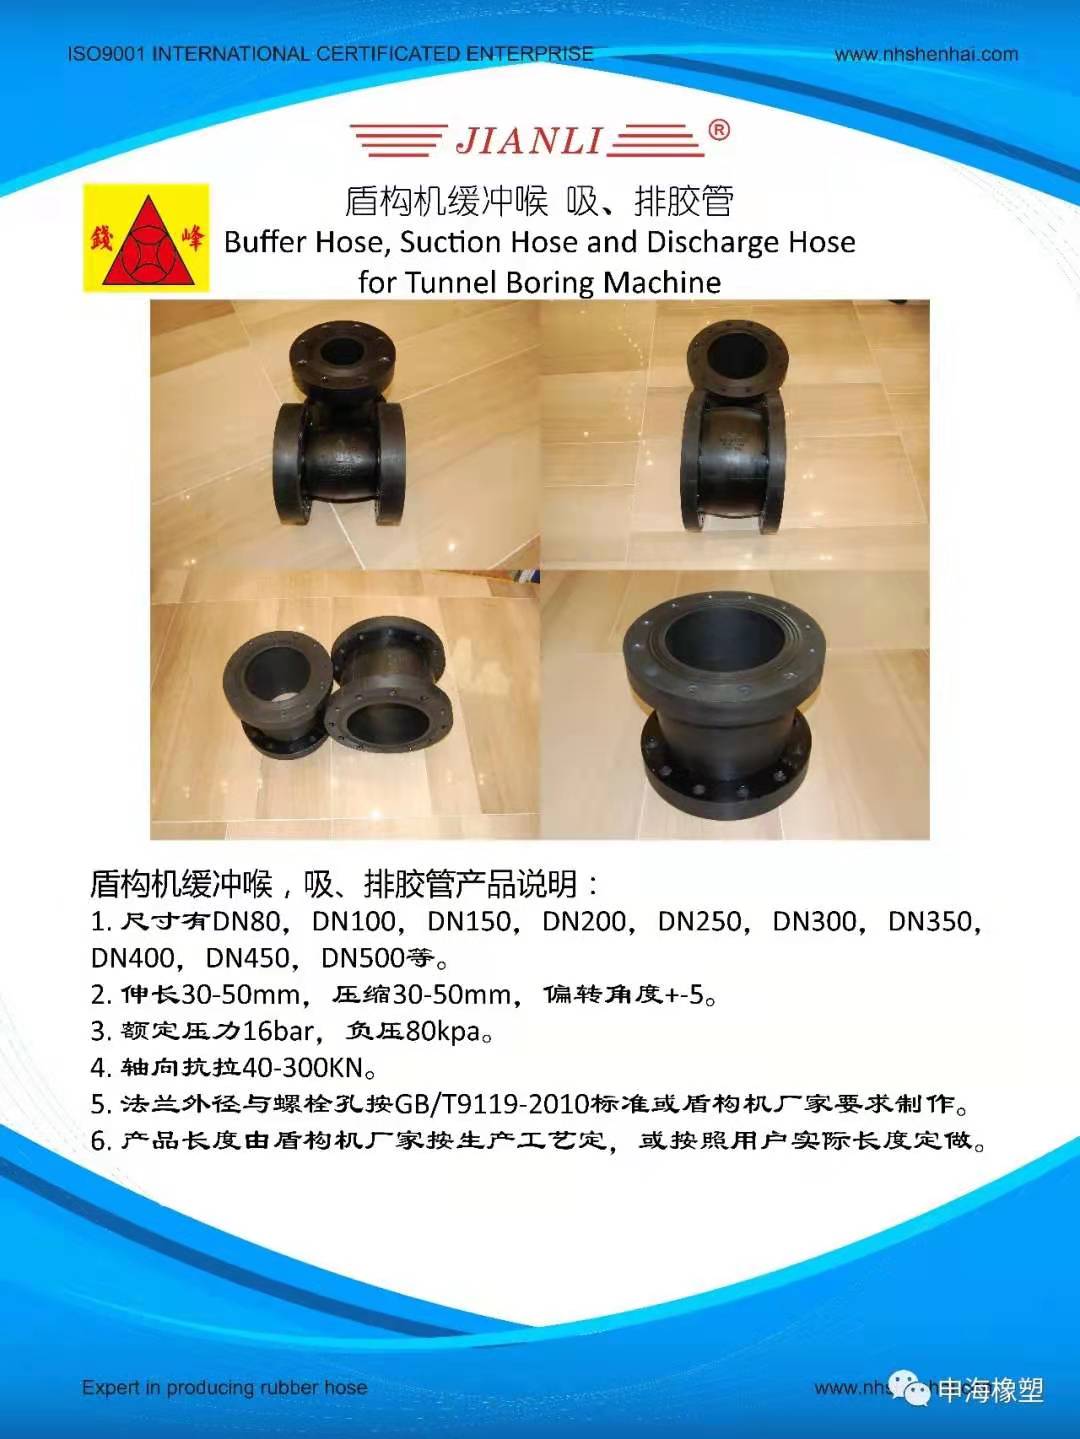 Buffer Hose, Suction Hose and Discharge Hose for Tunnel Boring Machine